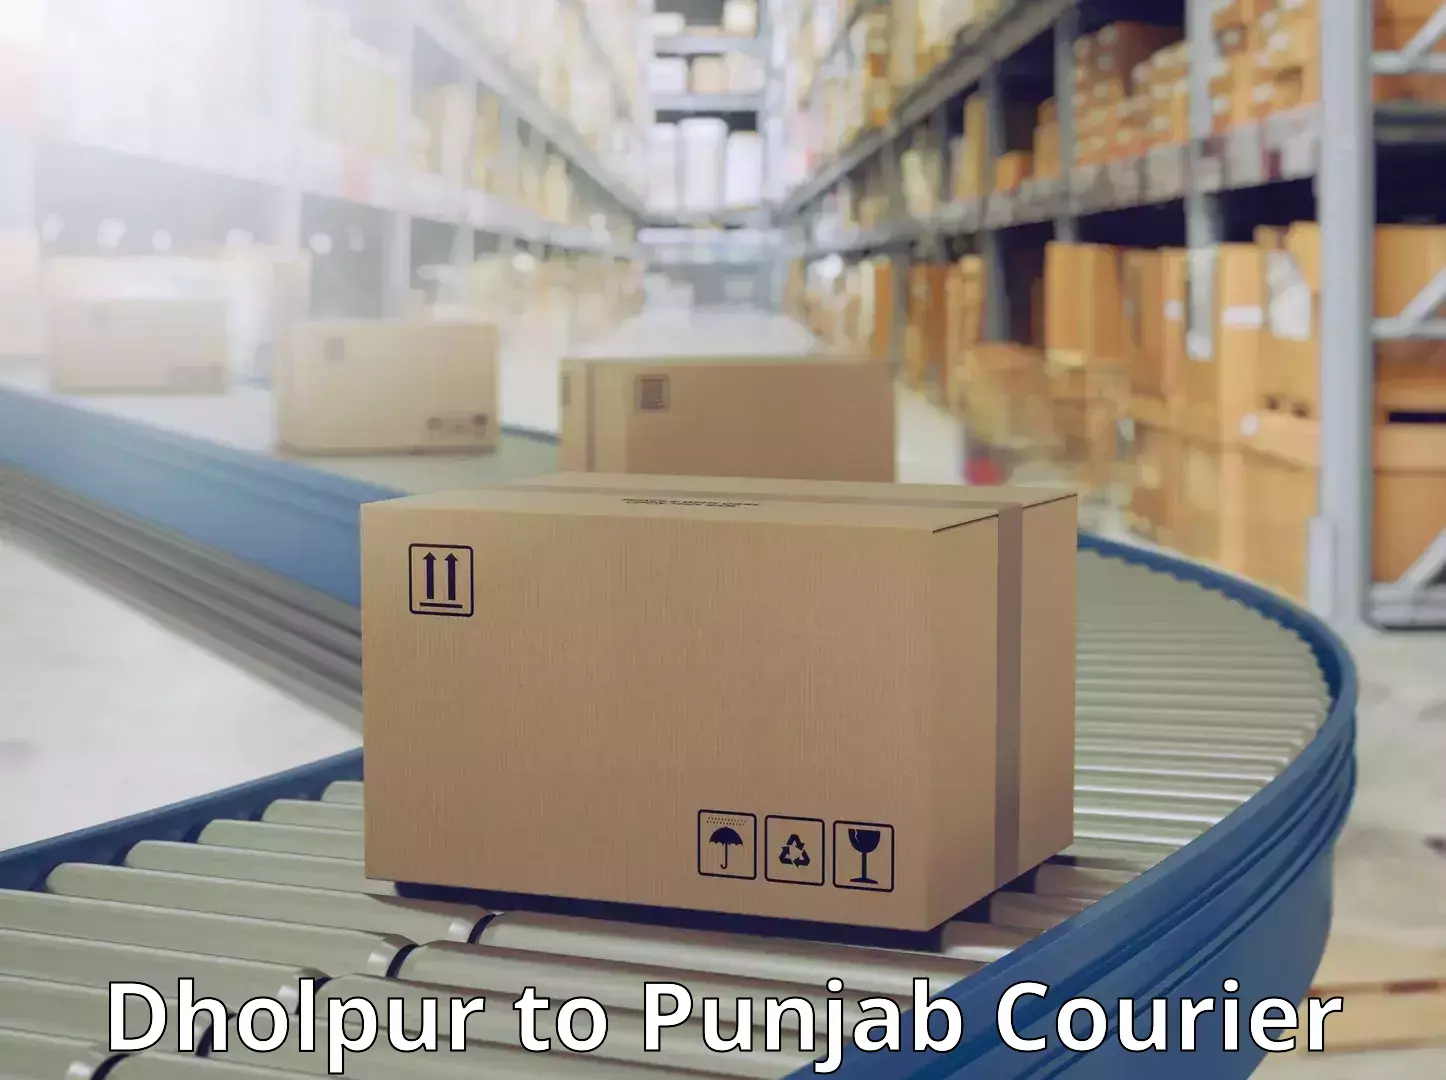 Customer-focused courier Dholpur to Khanna